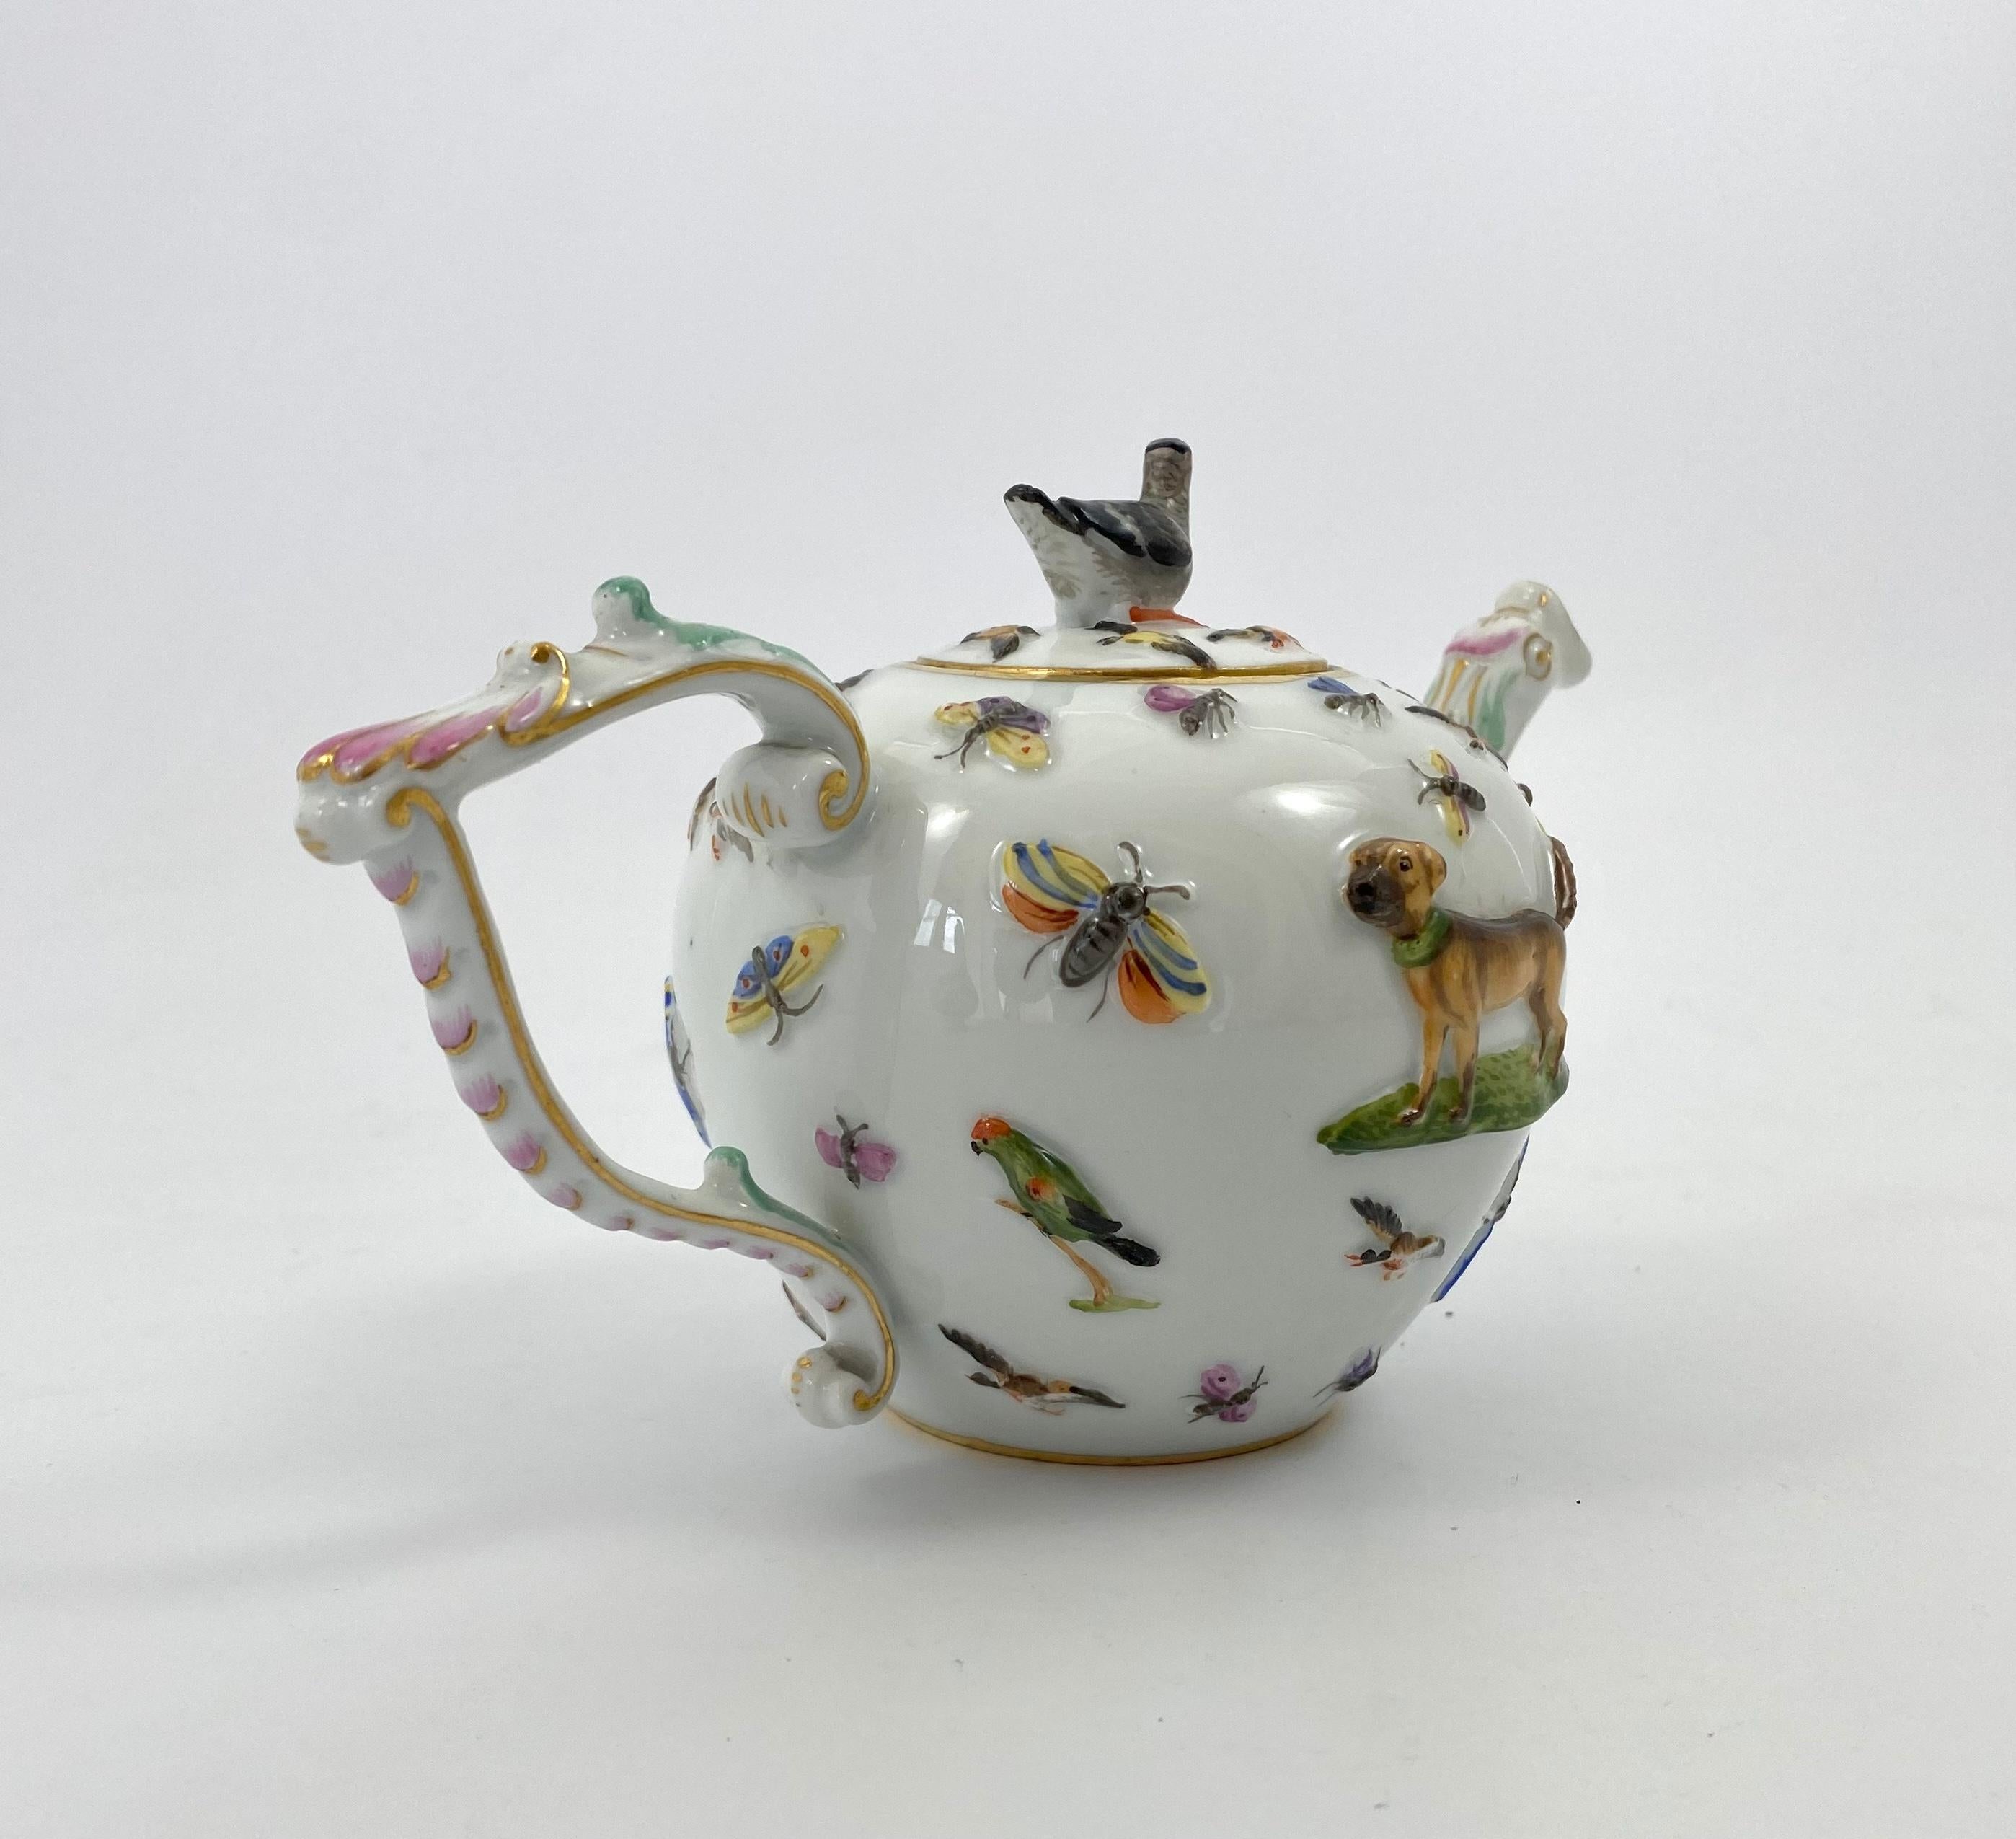 Mid-19th Century Meissen Porcelain ‘Cats and Dogs’ Teapot, c. 1830.